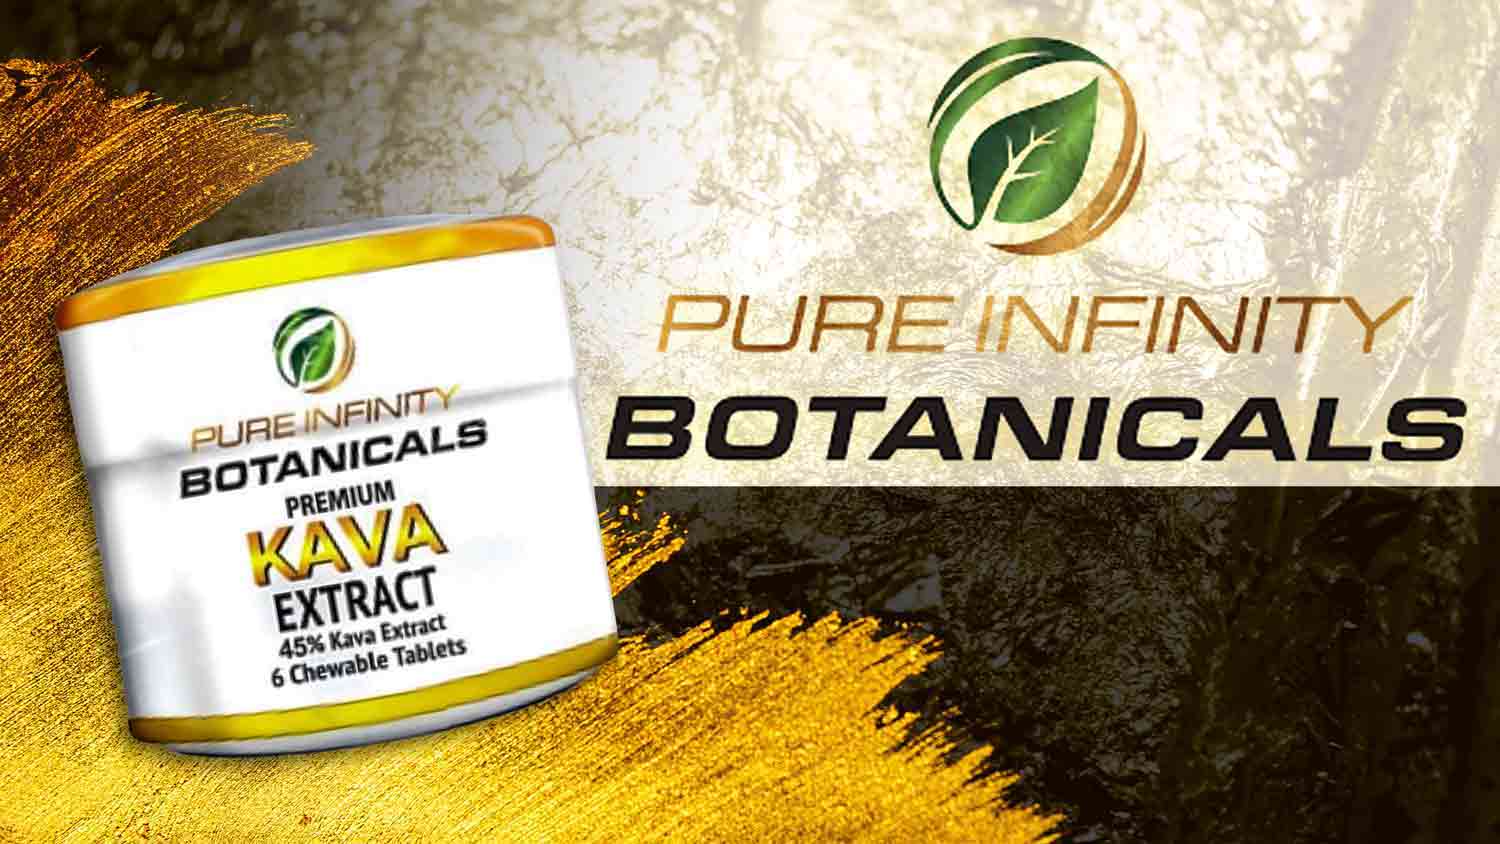 Pure Infinity Botanicals Kava Extract 6 Tablets